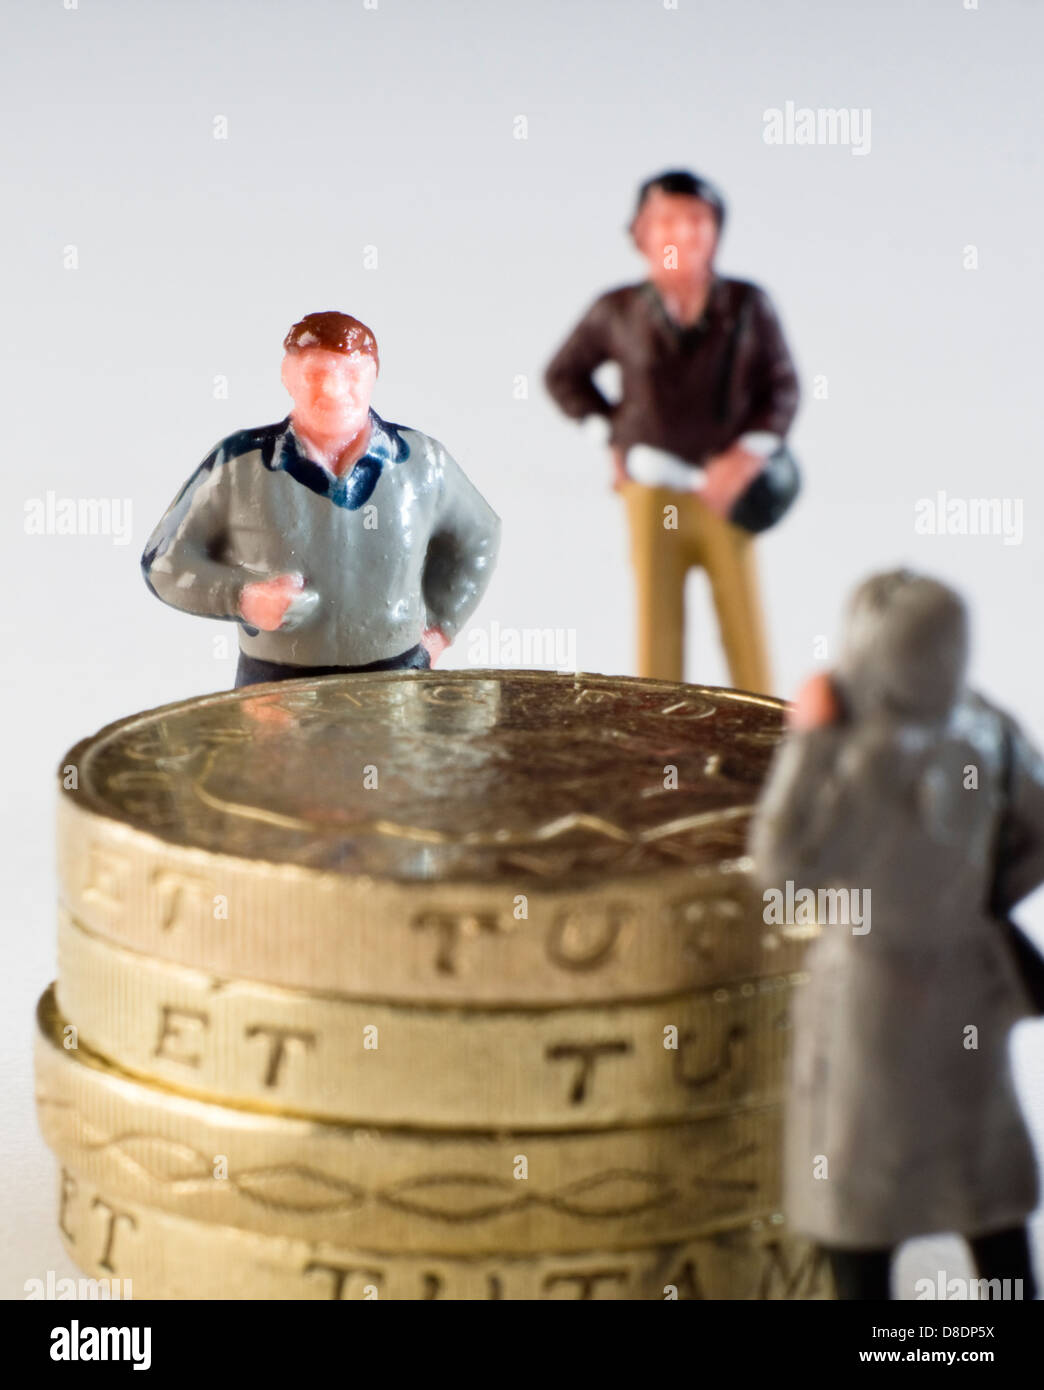 Small people models and money Financial concept Stock Photo